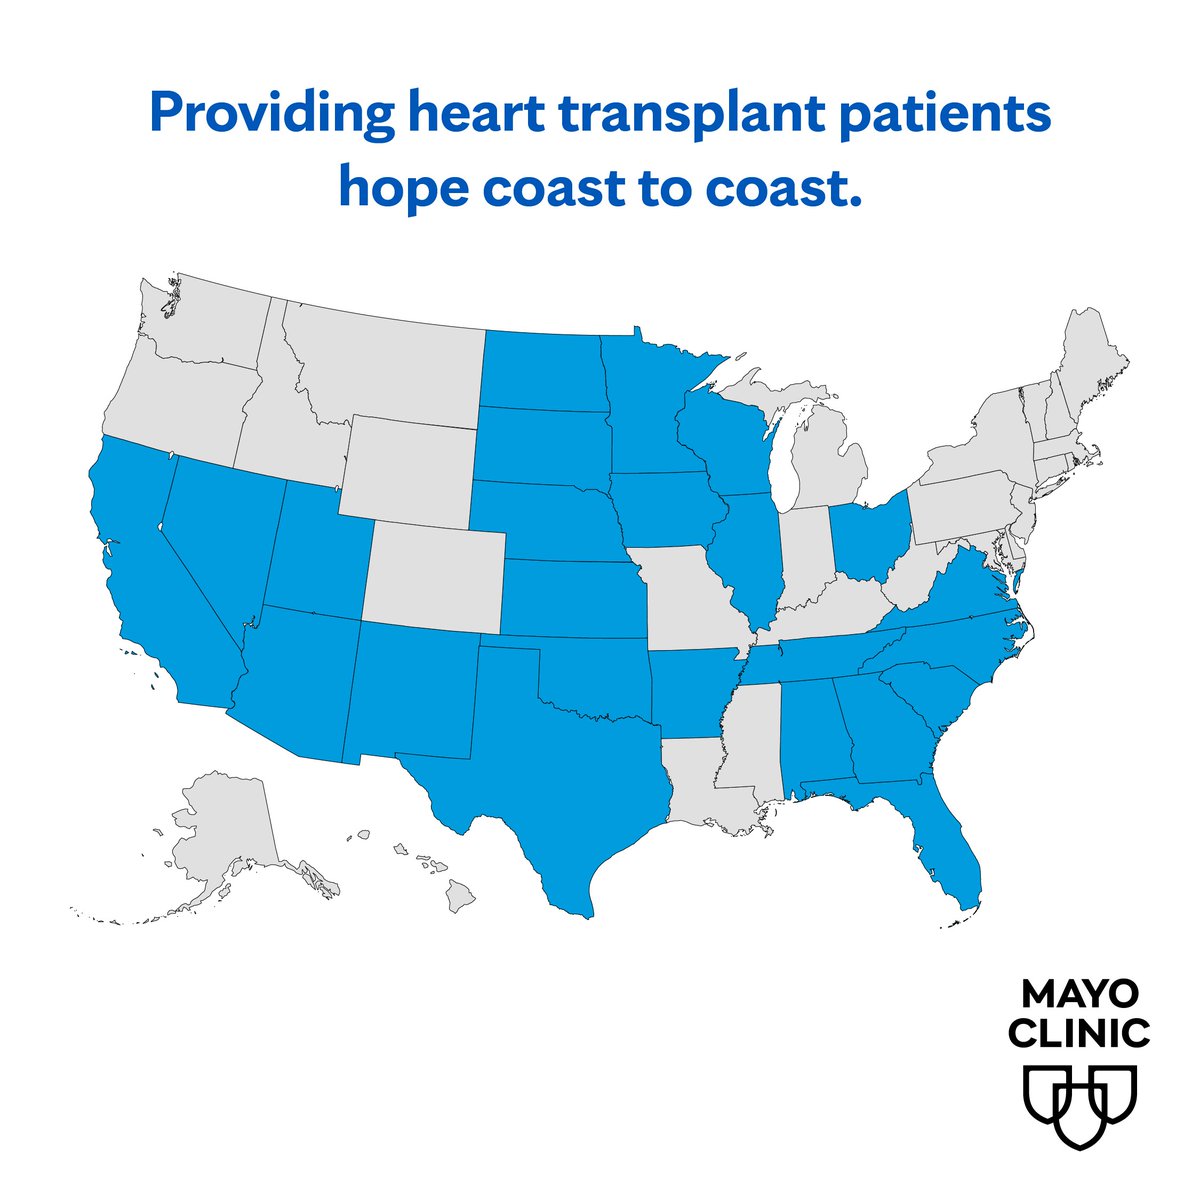 In 2023, Mayo Clinic’s #HeartTransplant Program completed 186 heart transplants on patients from 24 states – spreading hope and saving lives! If you or someone you love is facing the #heart challenges, @MayoClinic is here for you. Learn more here: mayocl.in/4aXwL94